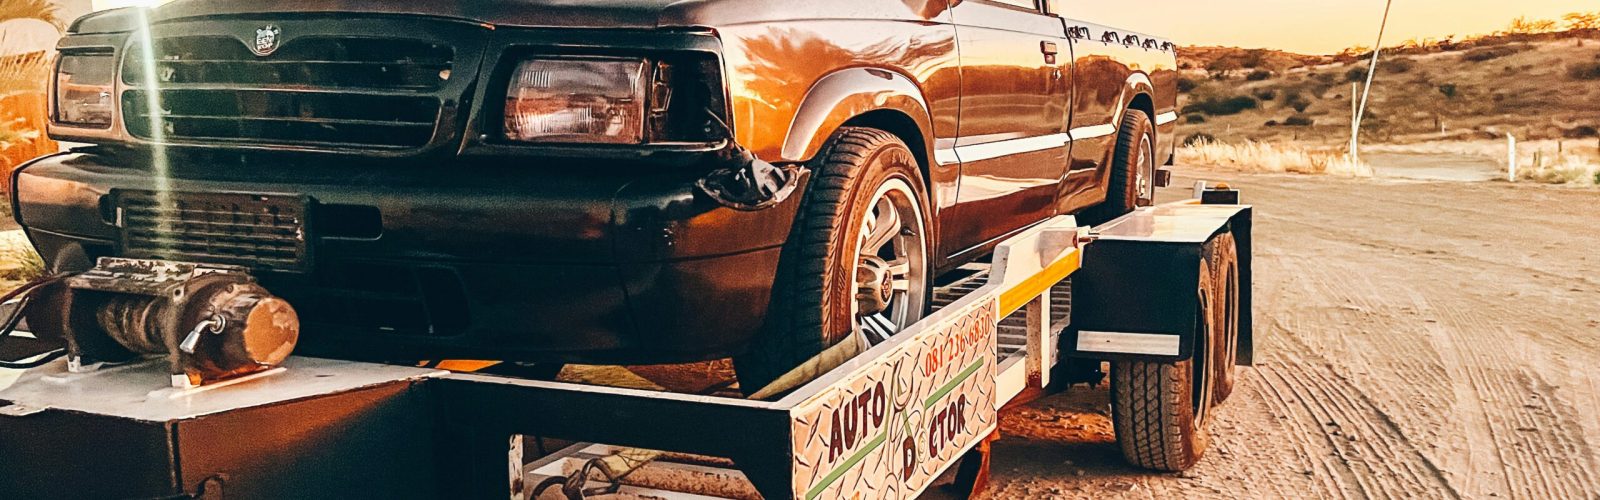 How to Choose the Best Towing Service Near You at an Affordable Price